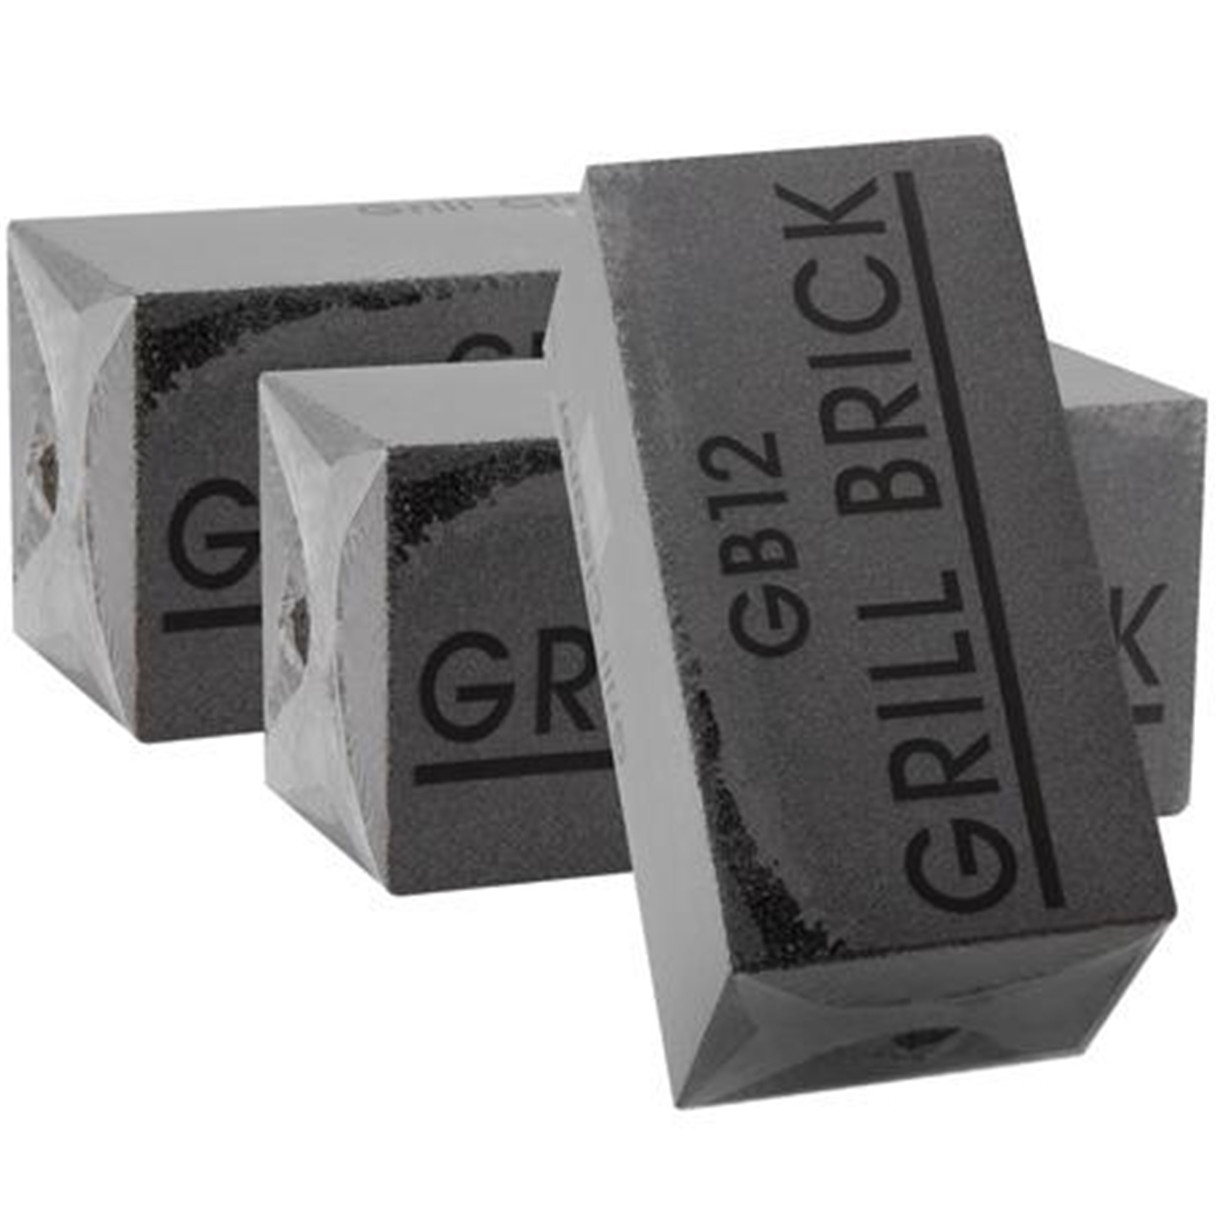 Grill Cleaning Brick Block, Non-Toxic Odorless Grill Stones Cleaner